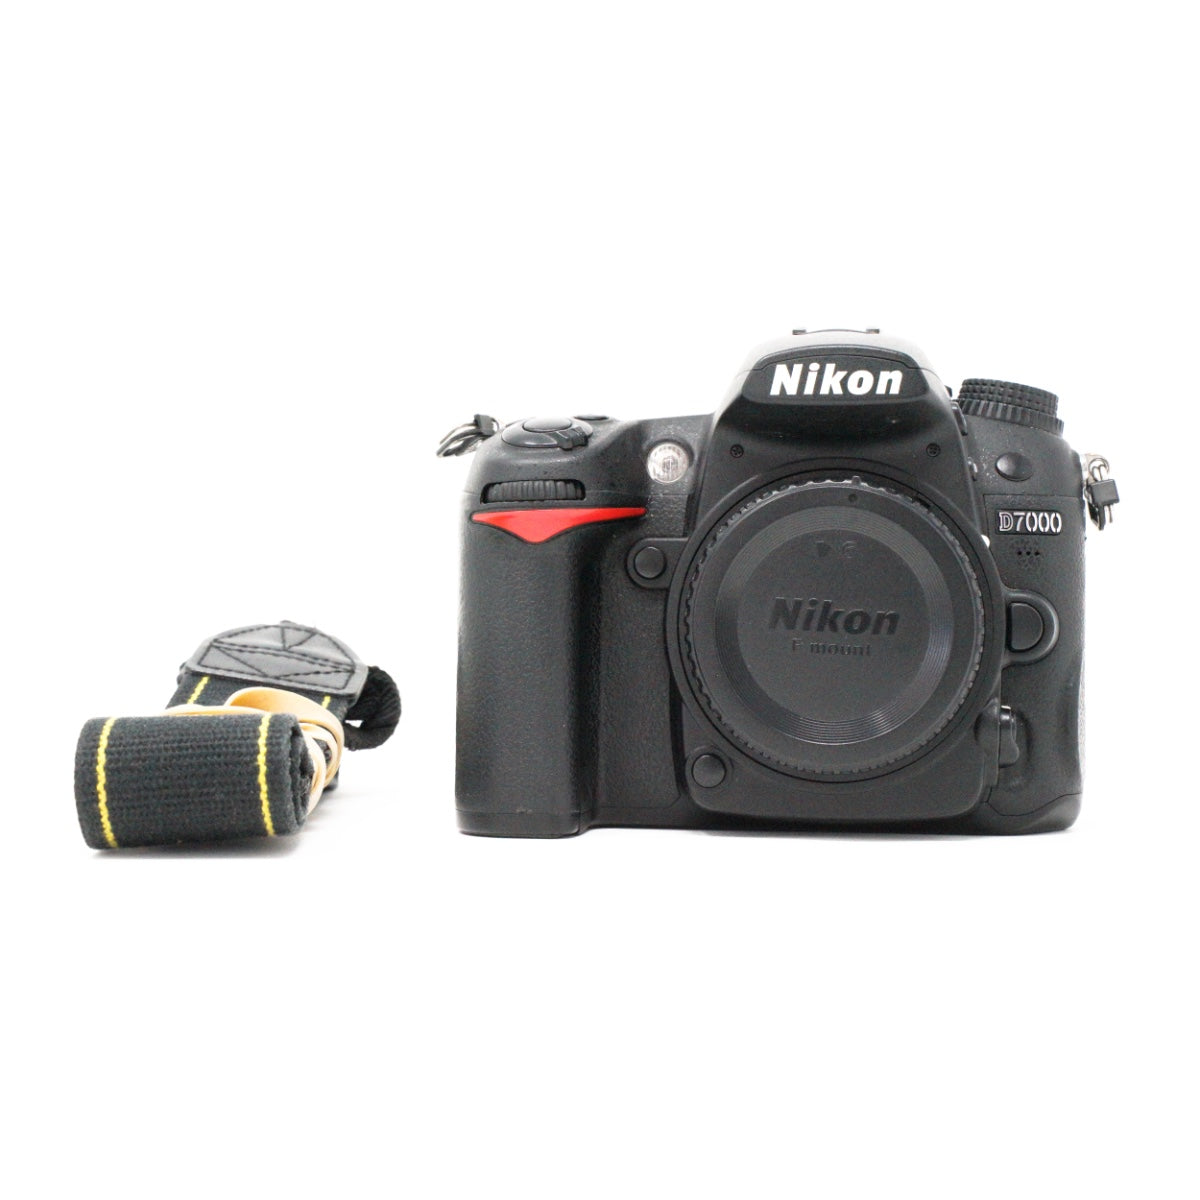 USED Nikon D7000 Camera Body Only - Battery, Charger, Strap